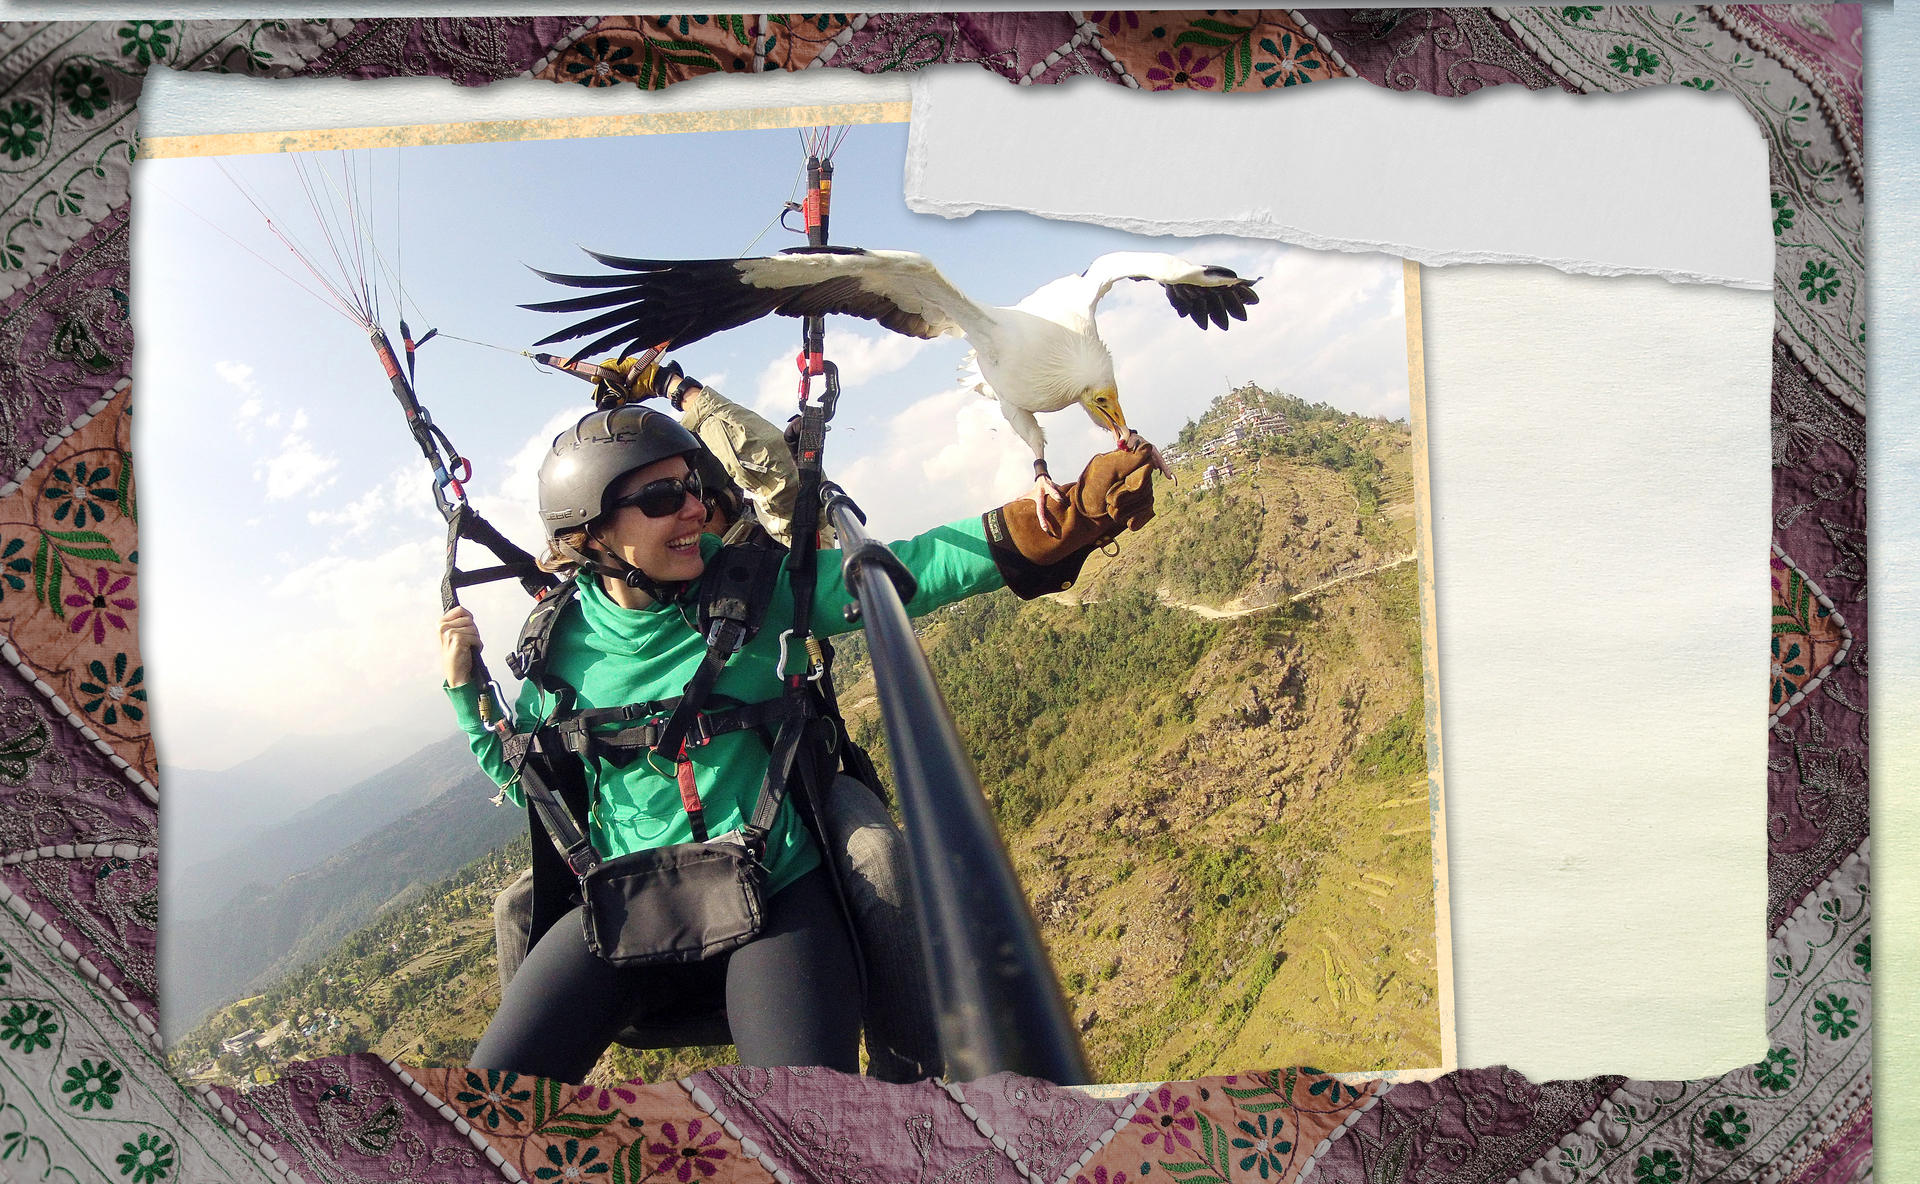 A vulture named Kevin takes a snack from the author's hand as she paraglides in Nepal. Photo: Parahawking/Phillippa Stewart